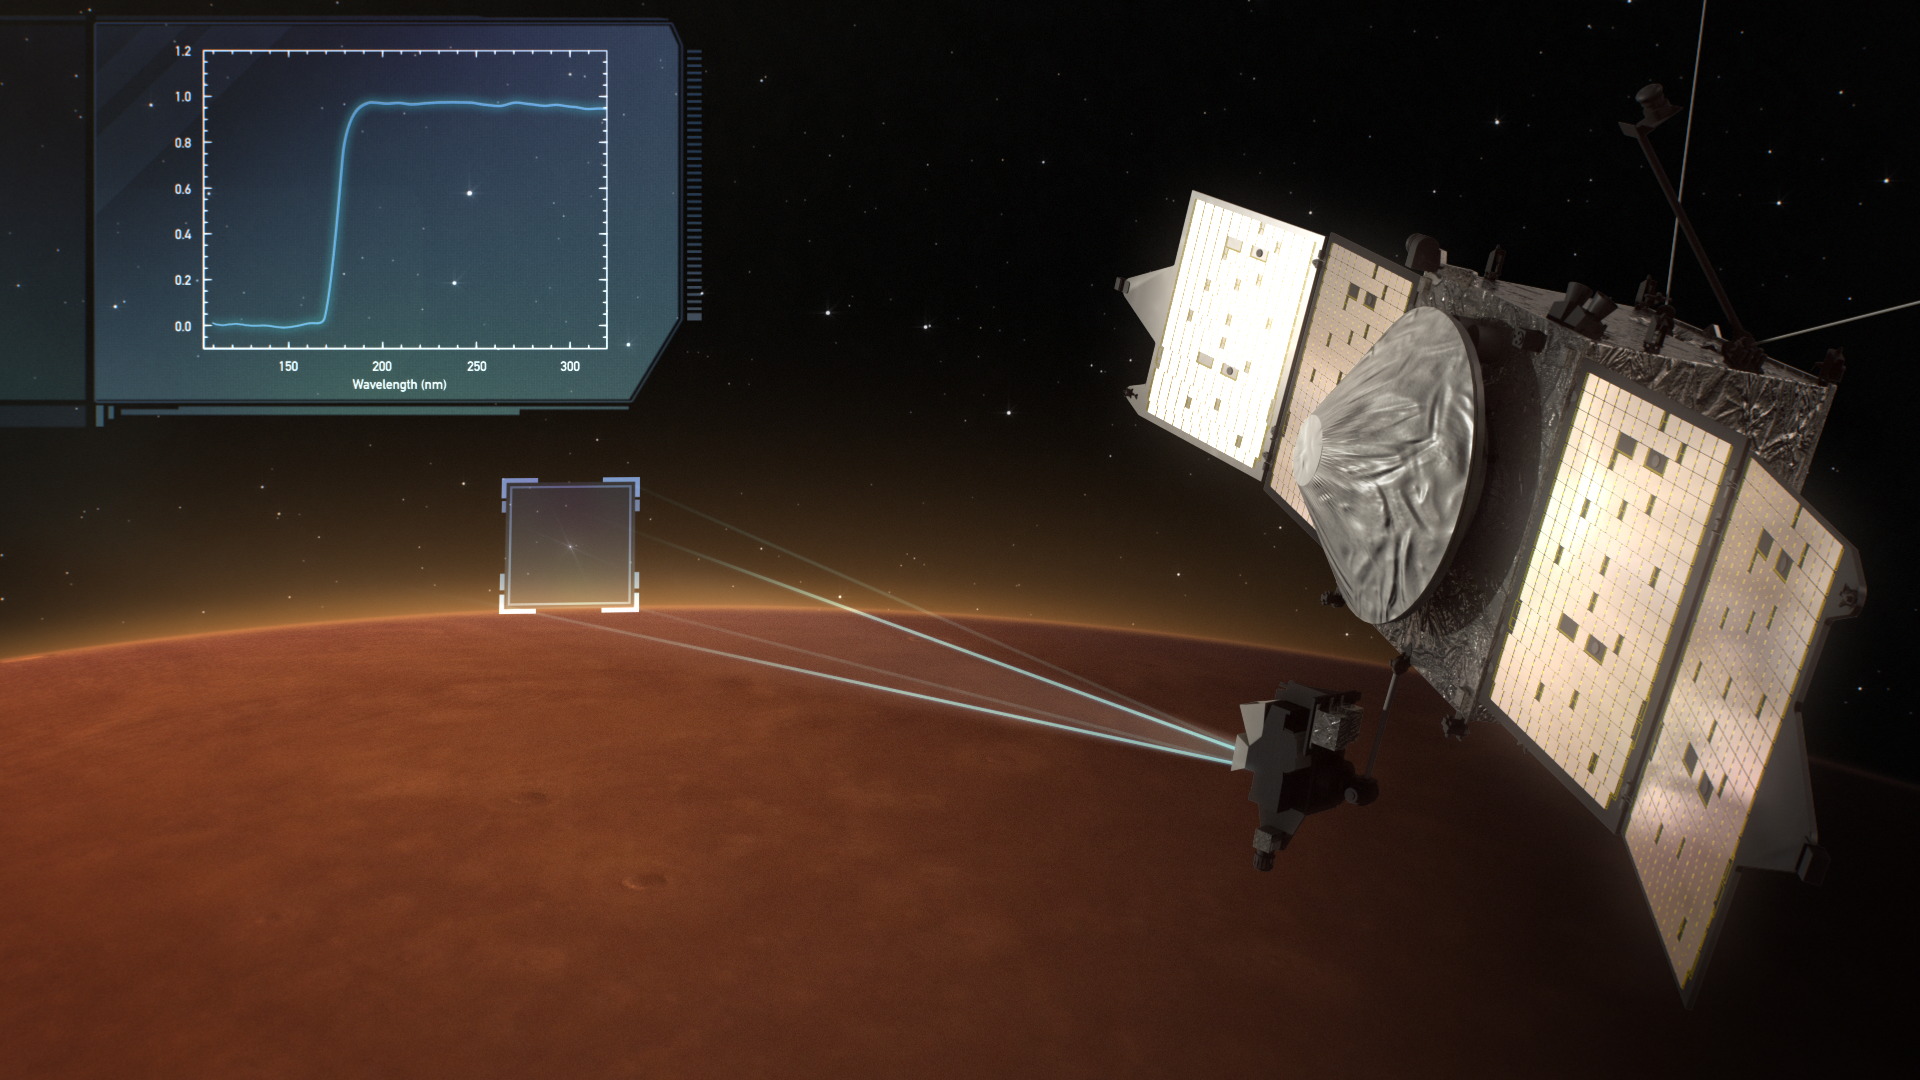 MAVEN observes a stellar occultation with its IUVS instrument. By splitting apart the light of setting stars, MAVEN can determine the composition of the Martian atmosphere.